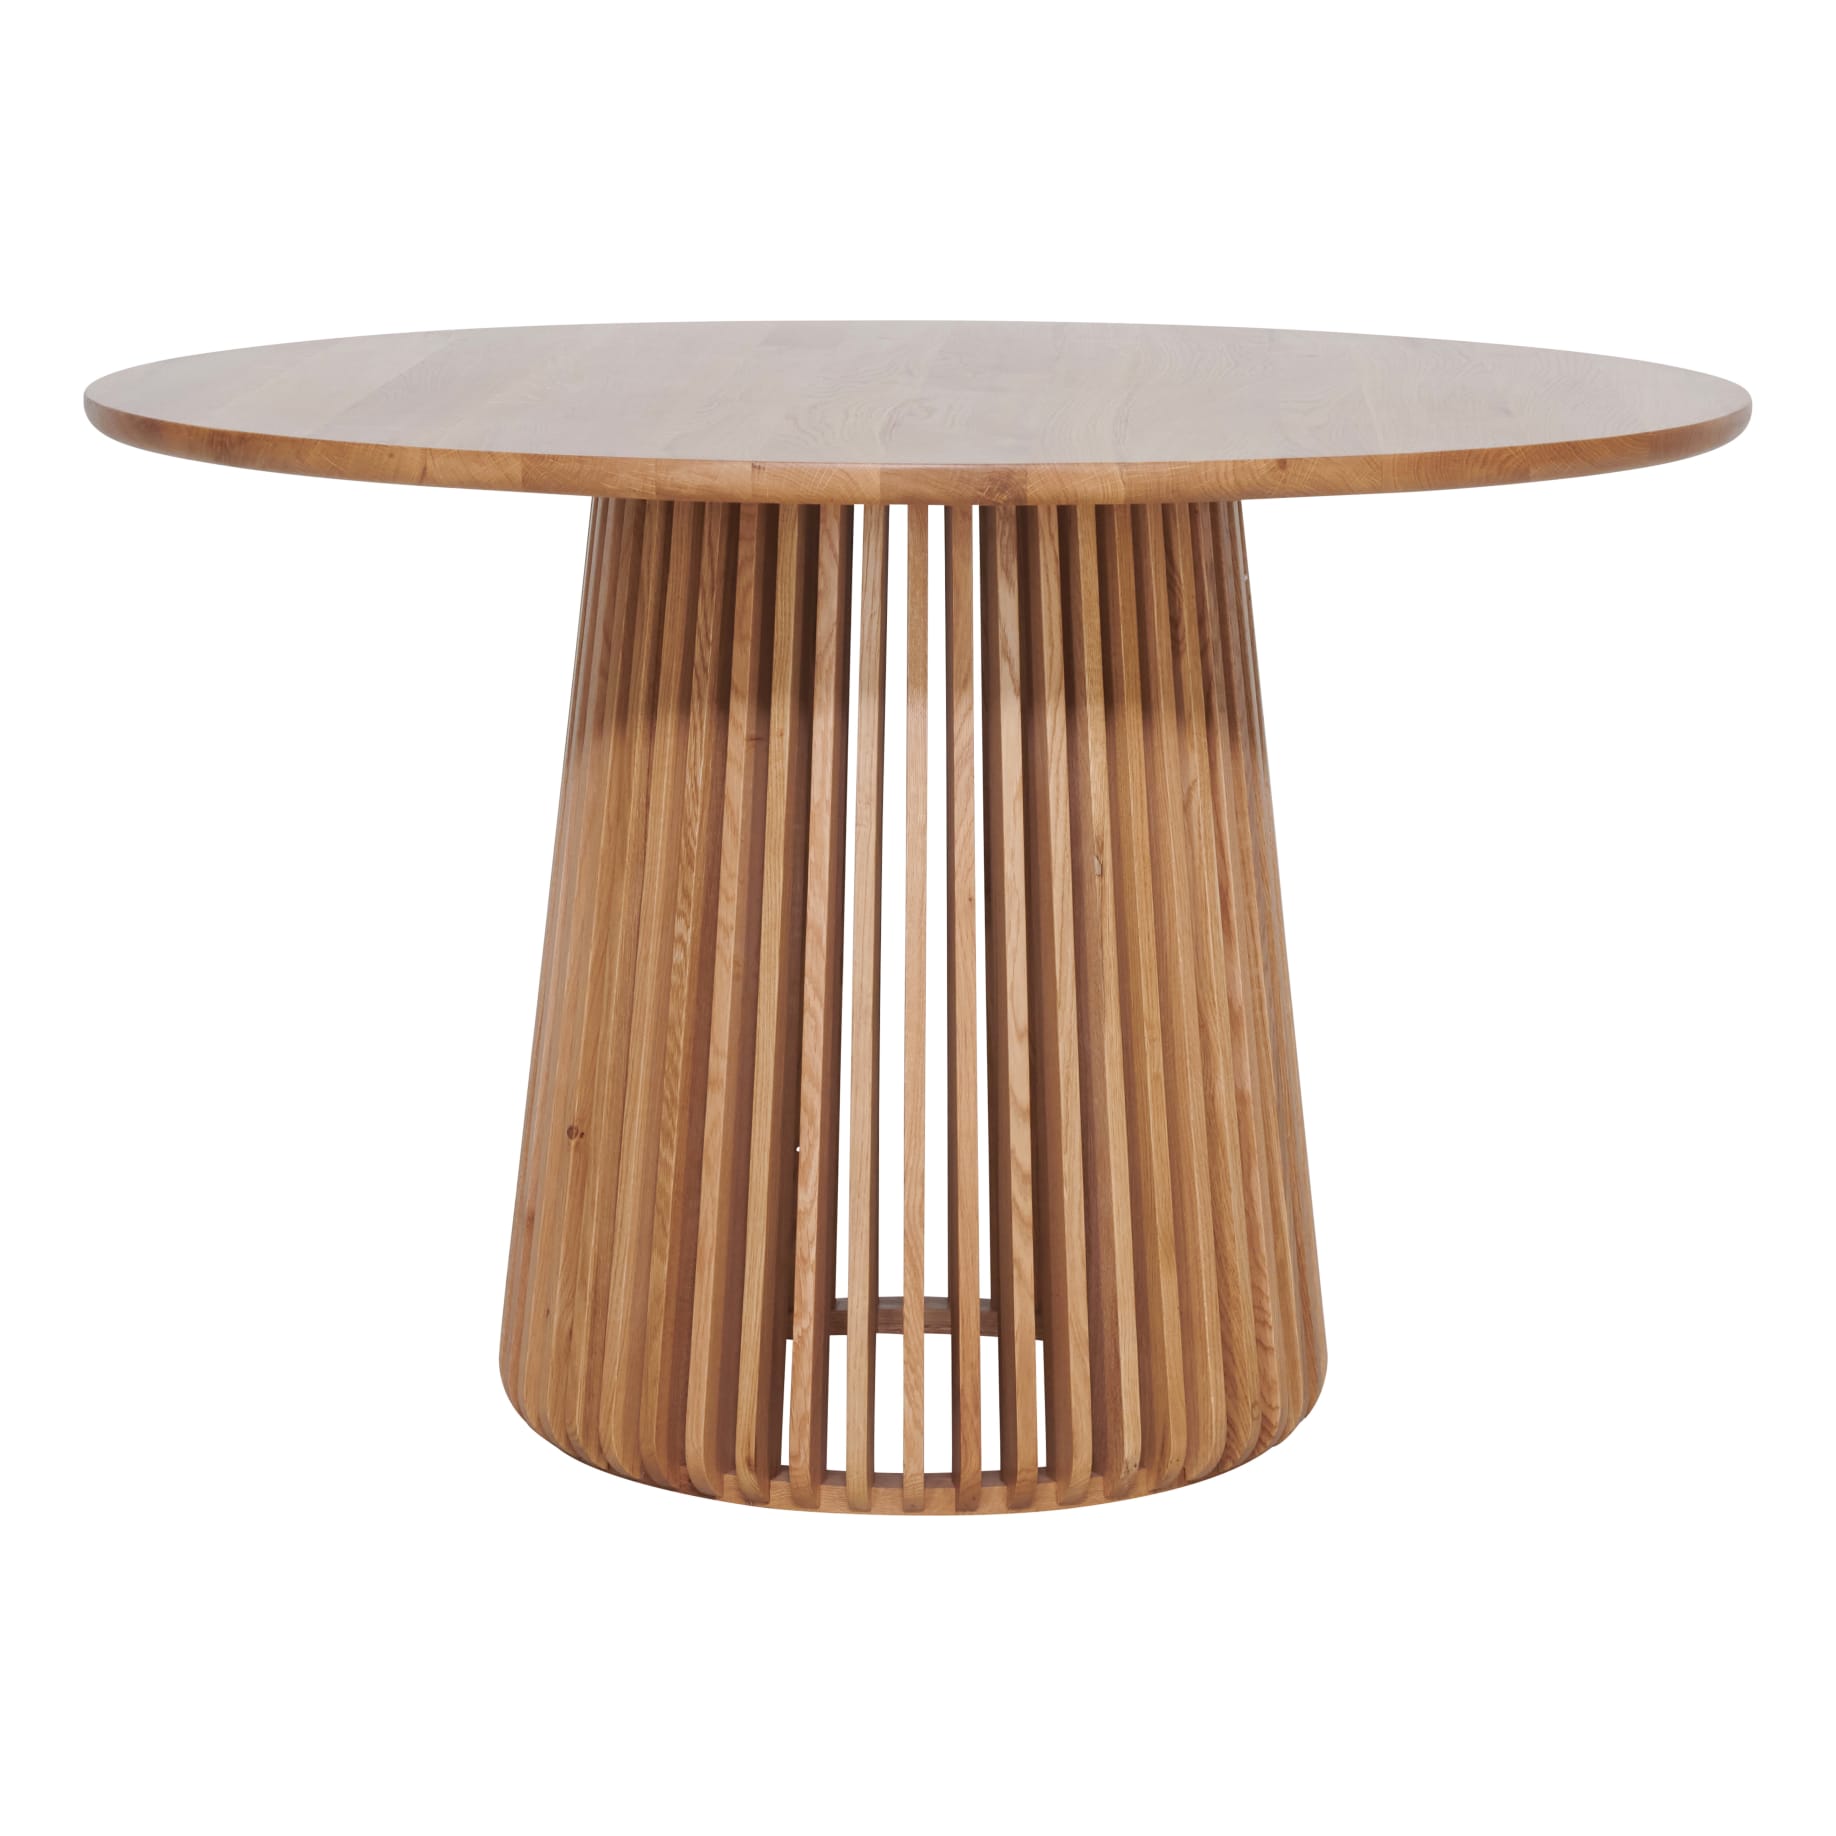 Pila Round Dining Table 120cm in American Oak